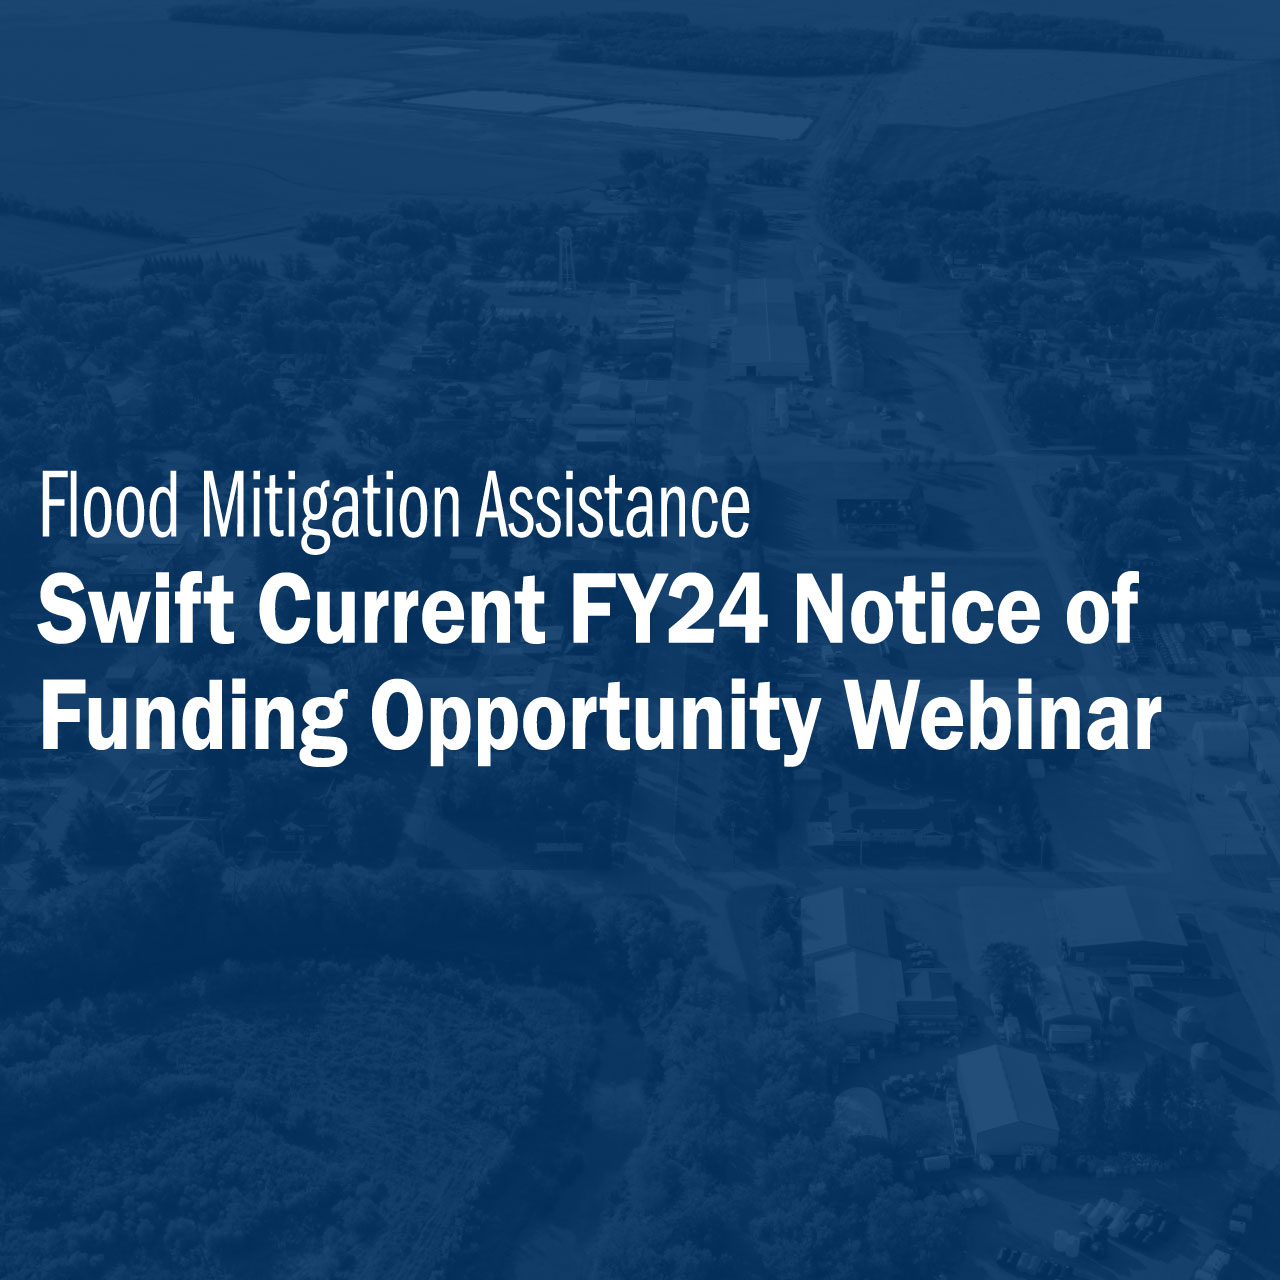 Flood Mitigation Assistance: Swift Current FY24 Notice of Funding Opportunity Webinar